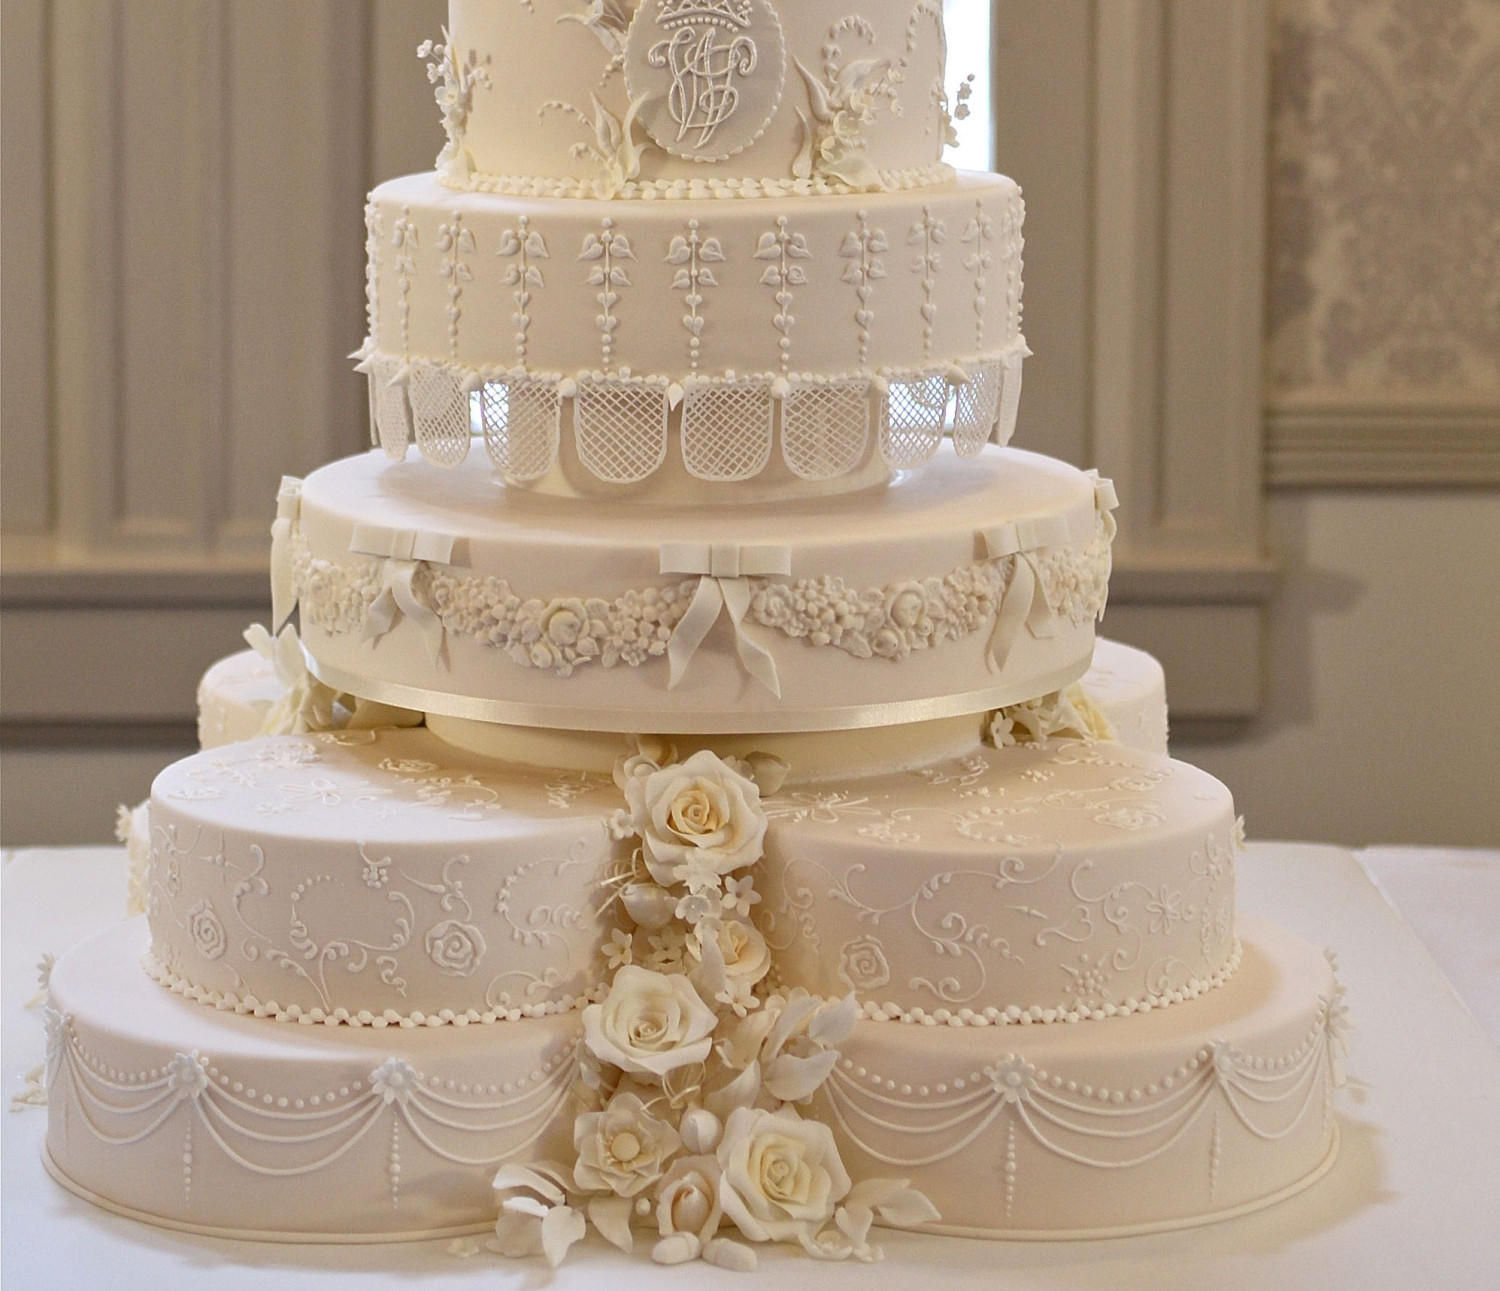 Wedding Cakes Com
 Best Places For Wedding Cakes In Tampa Bay – CBS Tampa